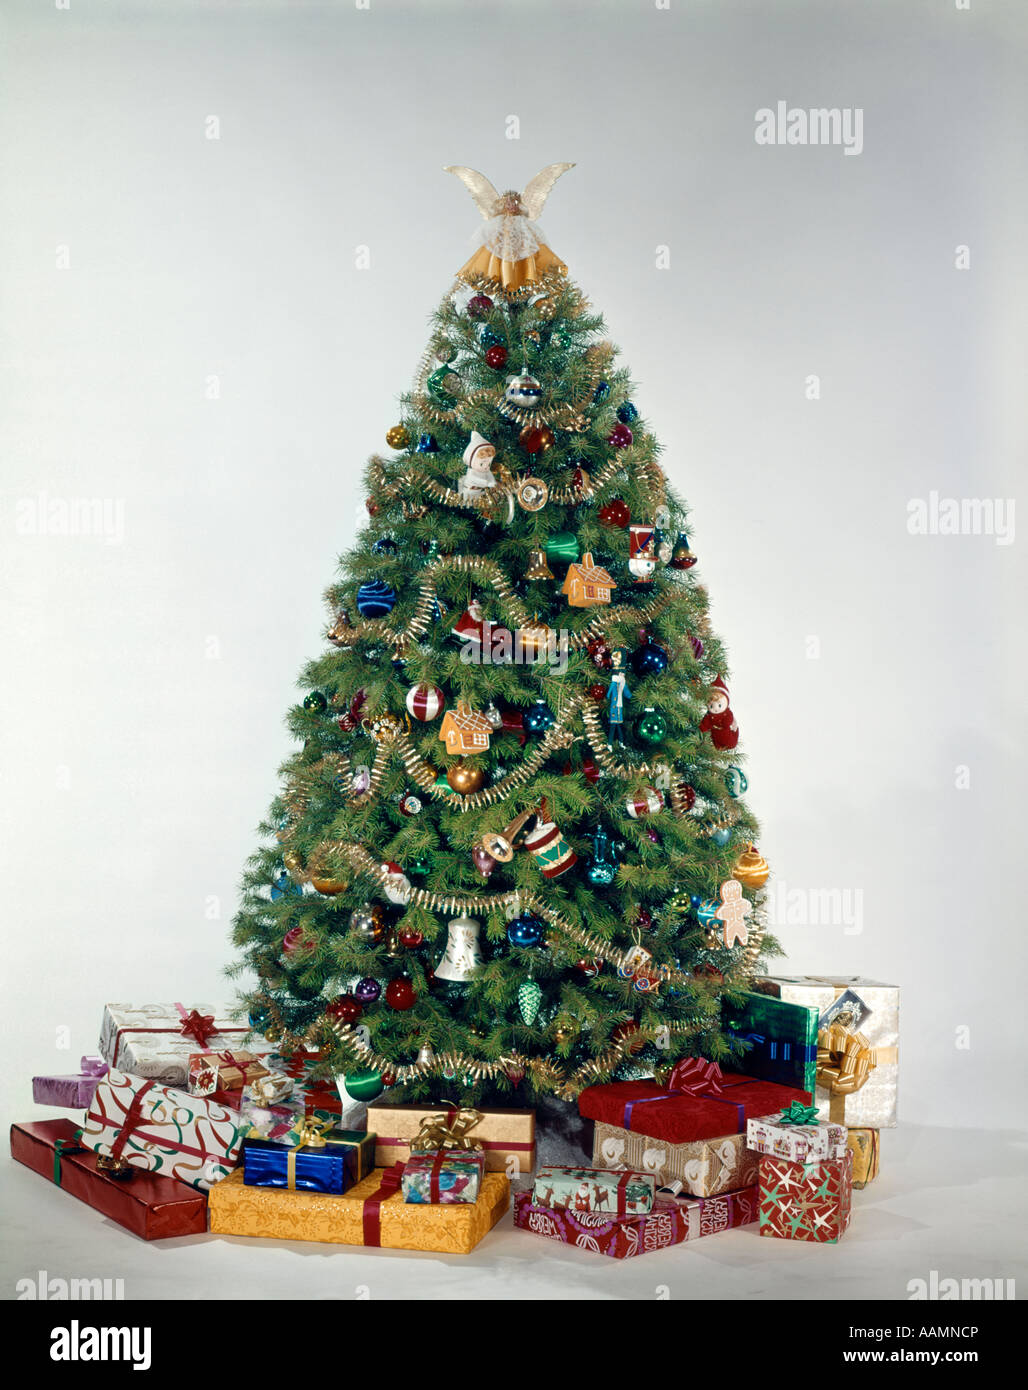 1950s 1960s 1970s COLORFUL DECORATED CHRISTMAS TREE SURROUNDED BY PRESENTS STUDIO INDOOR Stock Photo